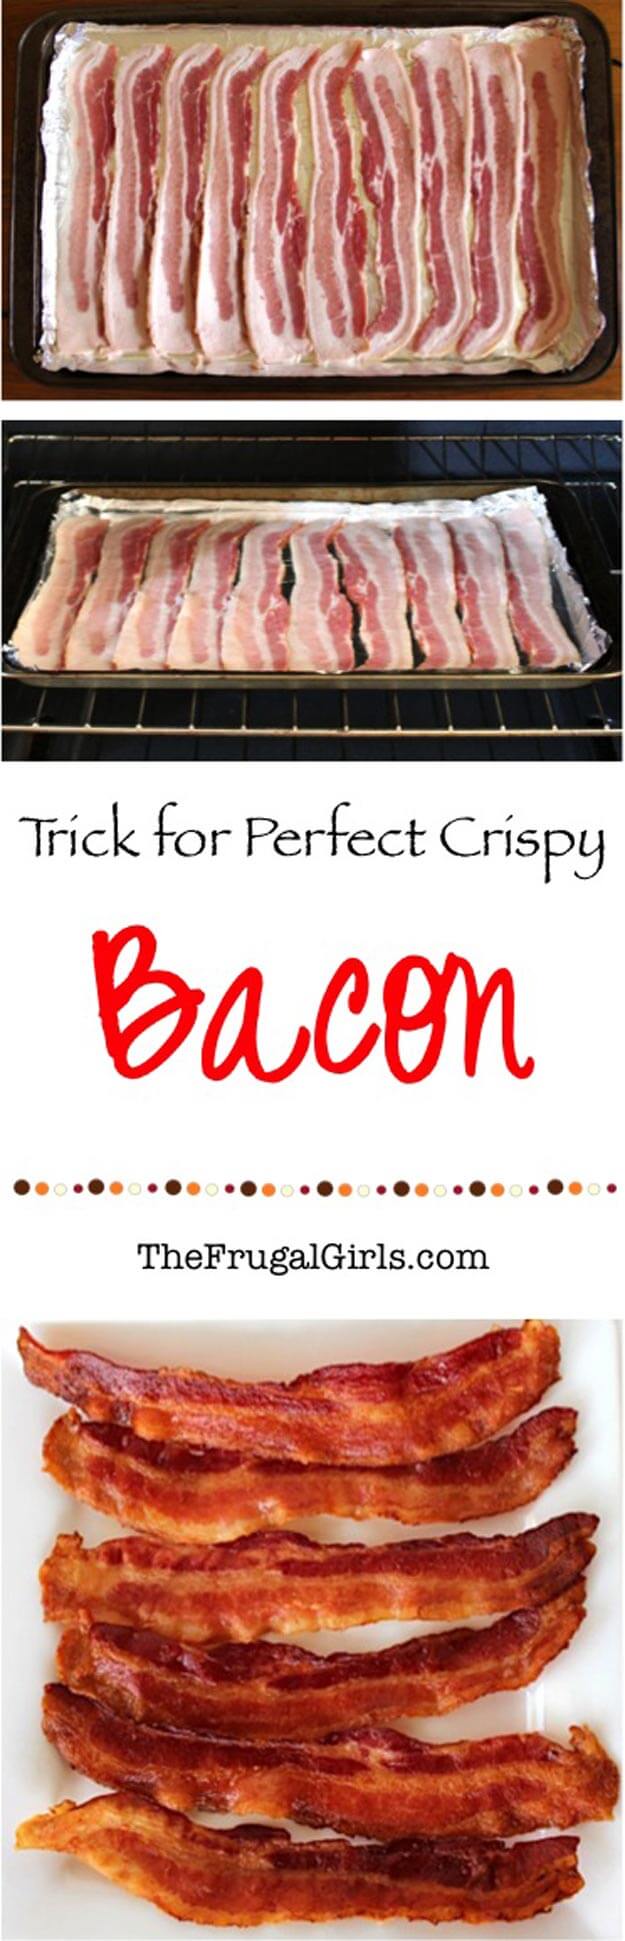 Make Perfect Crispy Bacon In The Oven